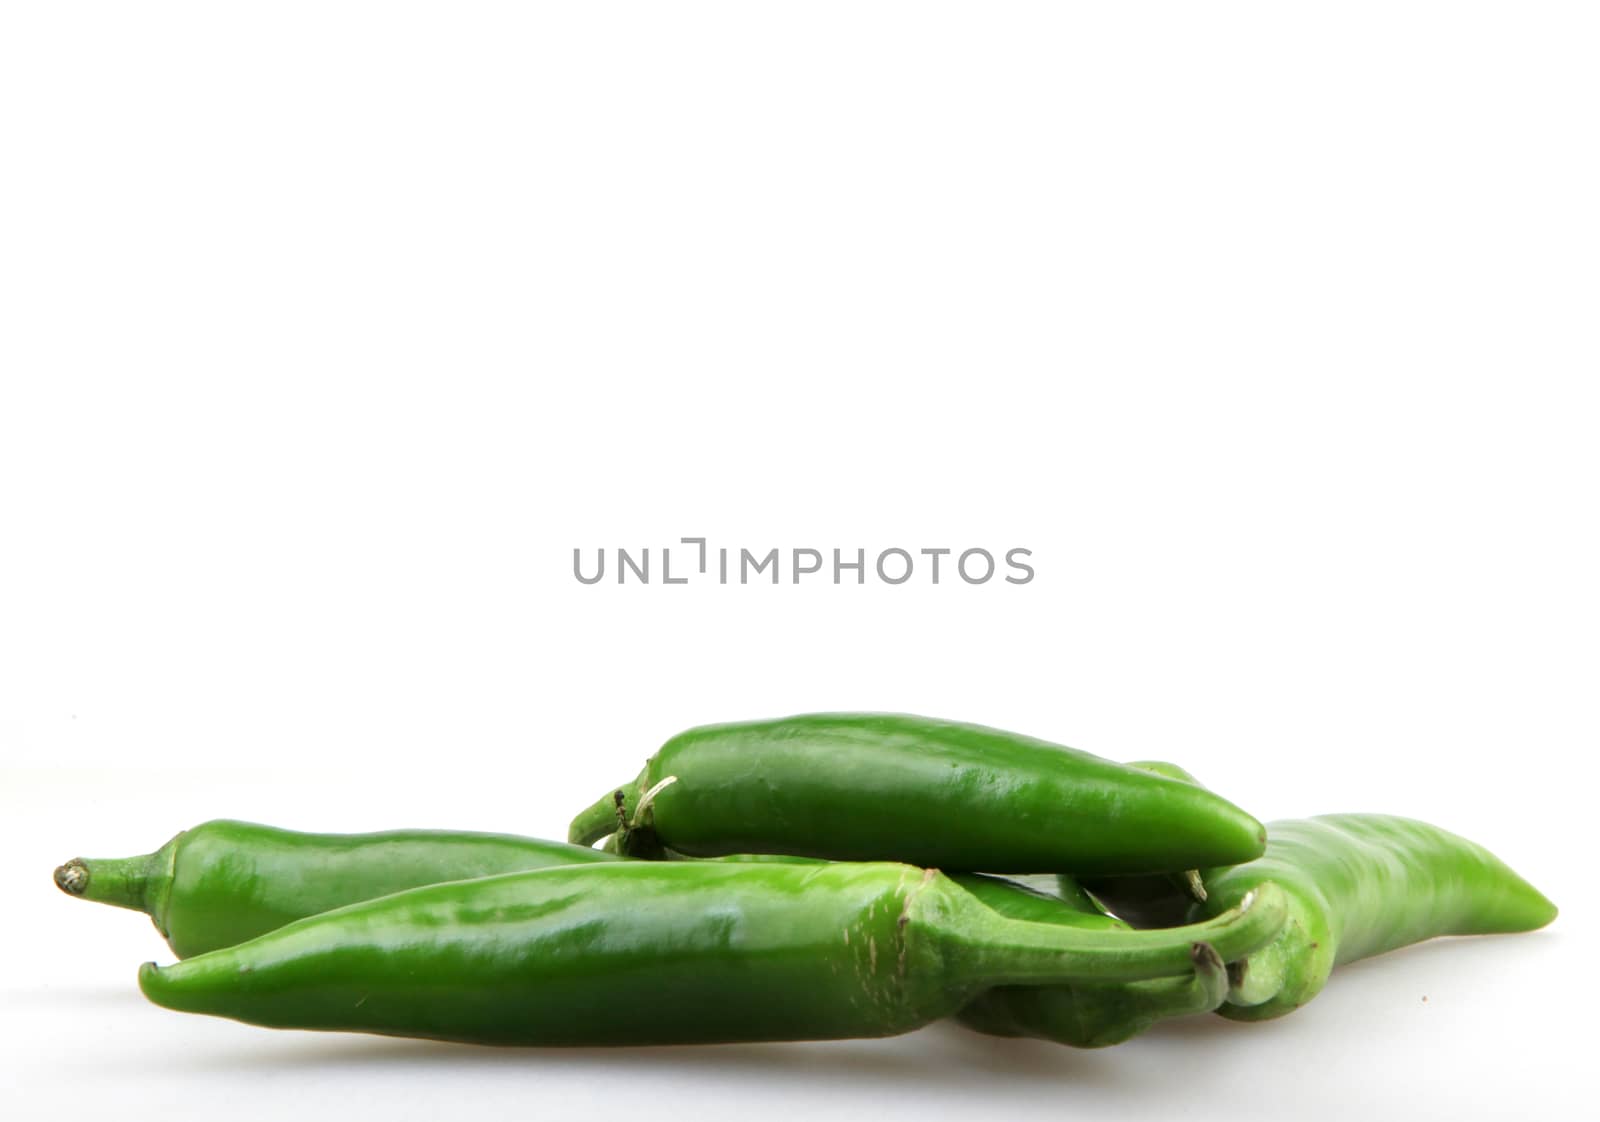 green pepper is isolated on a white background by nenov